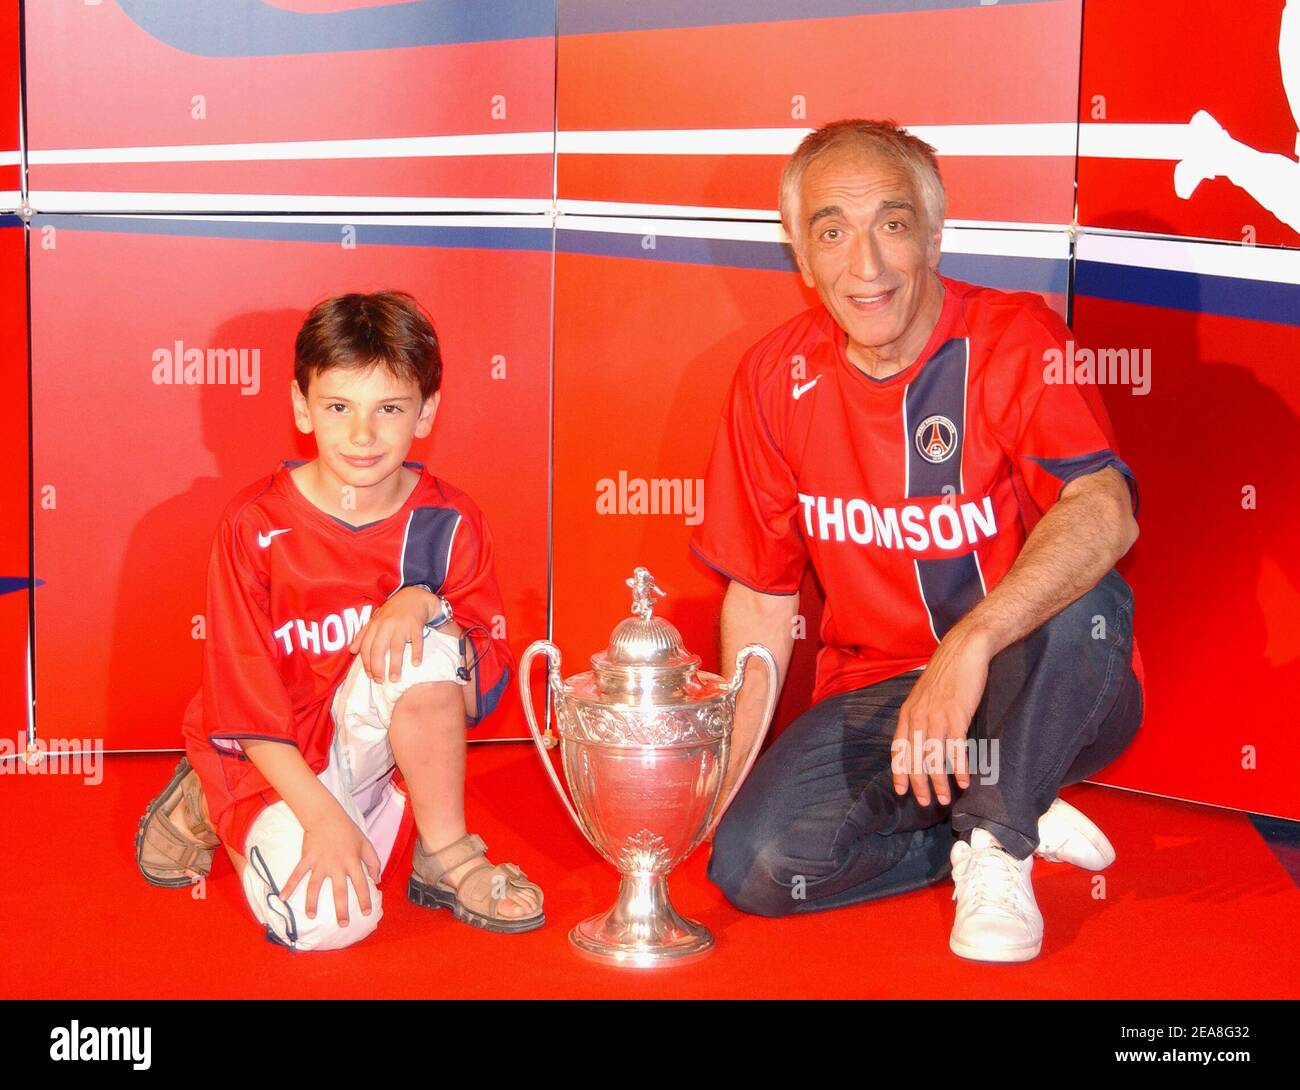 French actor Gerard Darmon and his son pictured at the party for the presentation of the PSG soccer team's new shirt made by sponsor Nike at the Parc des Princes stadium in Paris-France on June 29, 2004. Photo by Bruno Klein/ABACA. Stock Photo